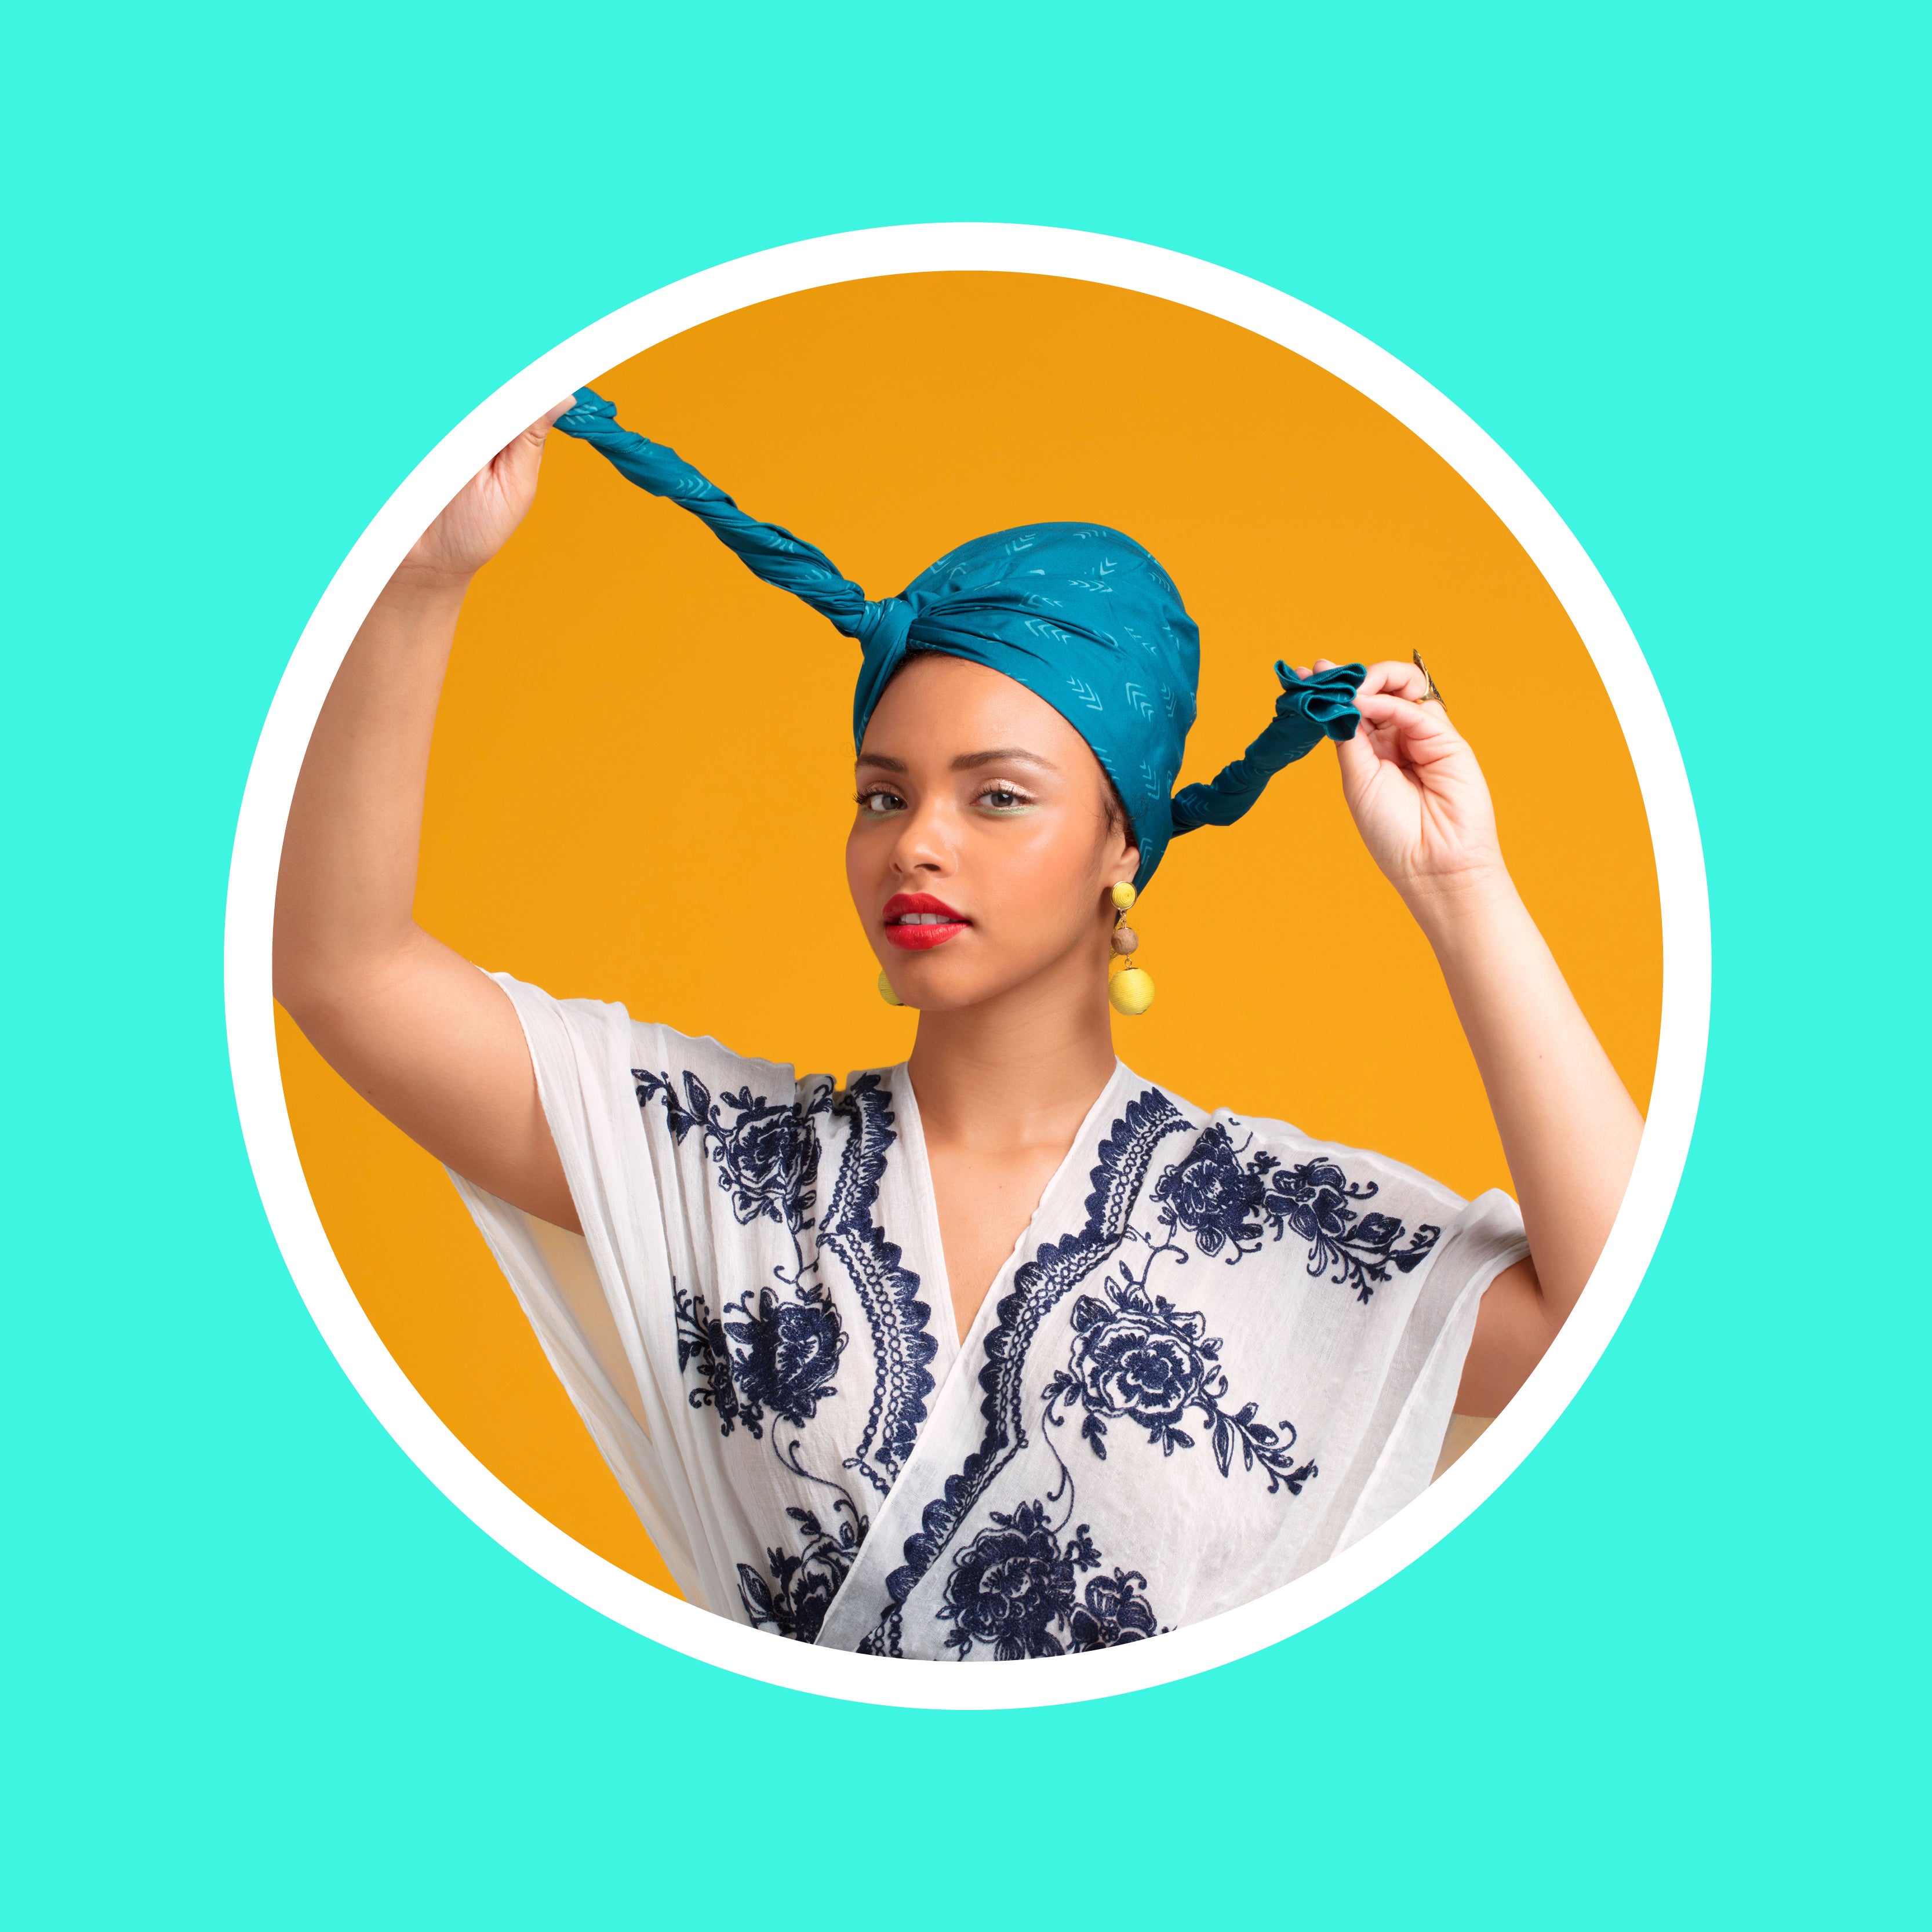 Head Wraps 101: How To Tie The Perfect Twisted Crown Head Wrap